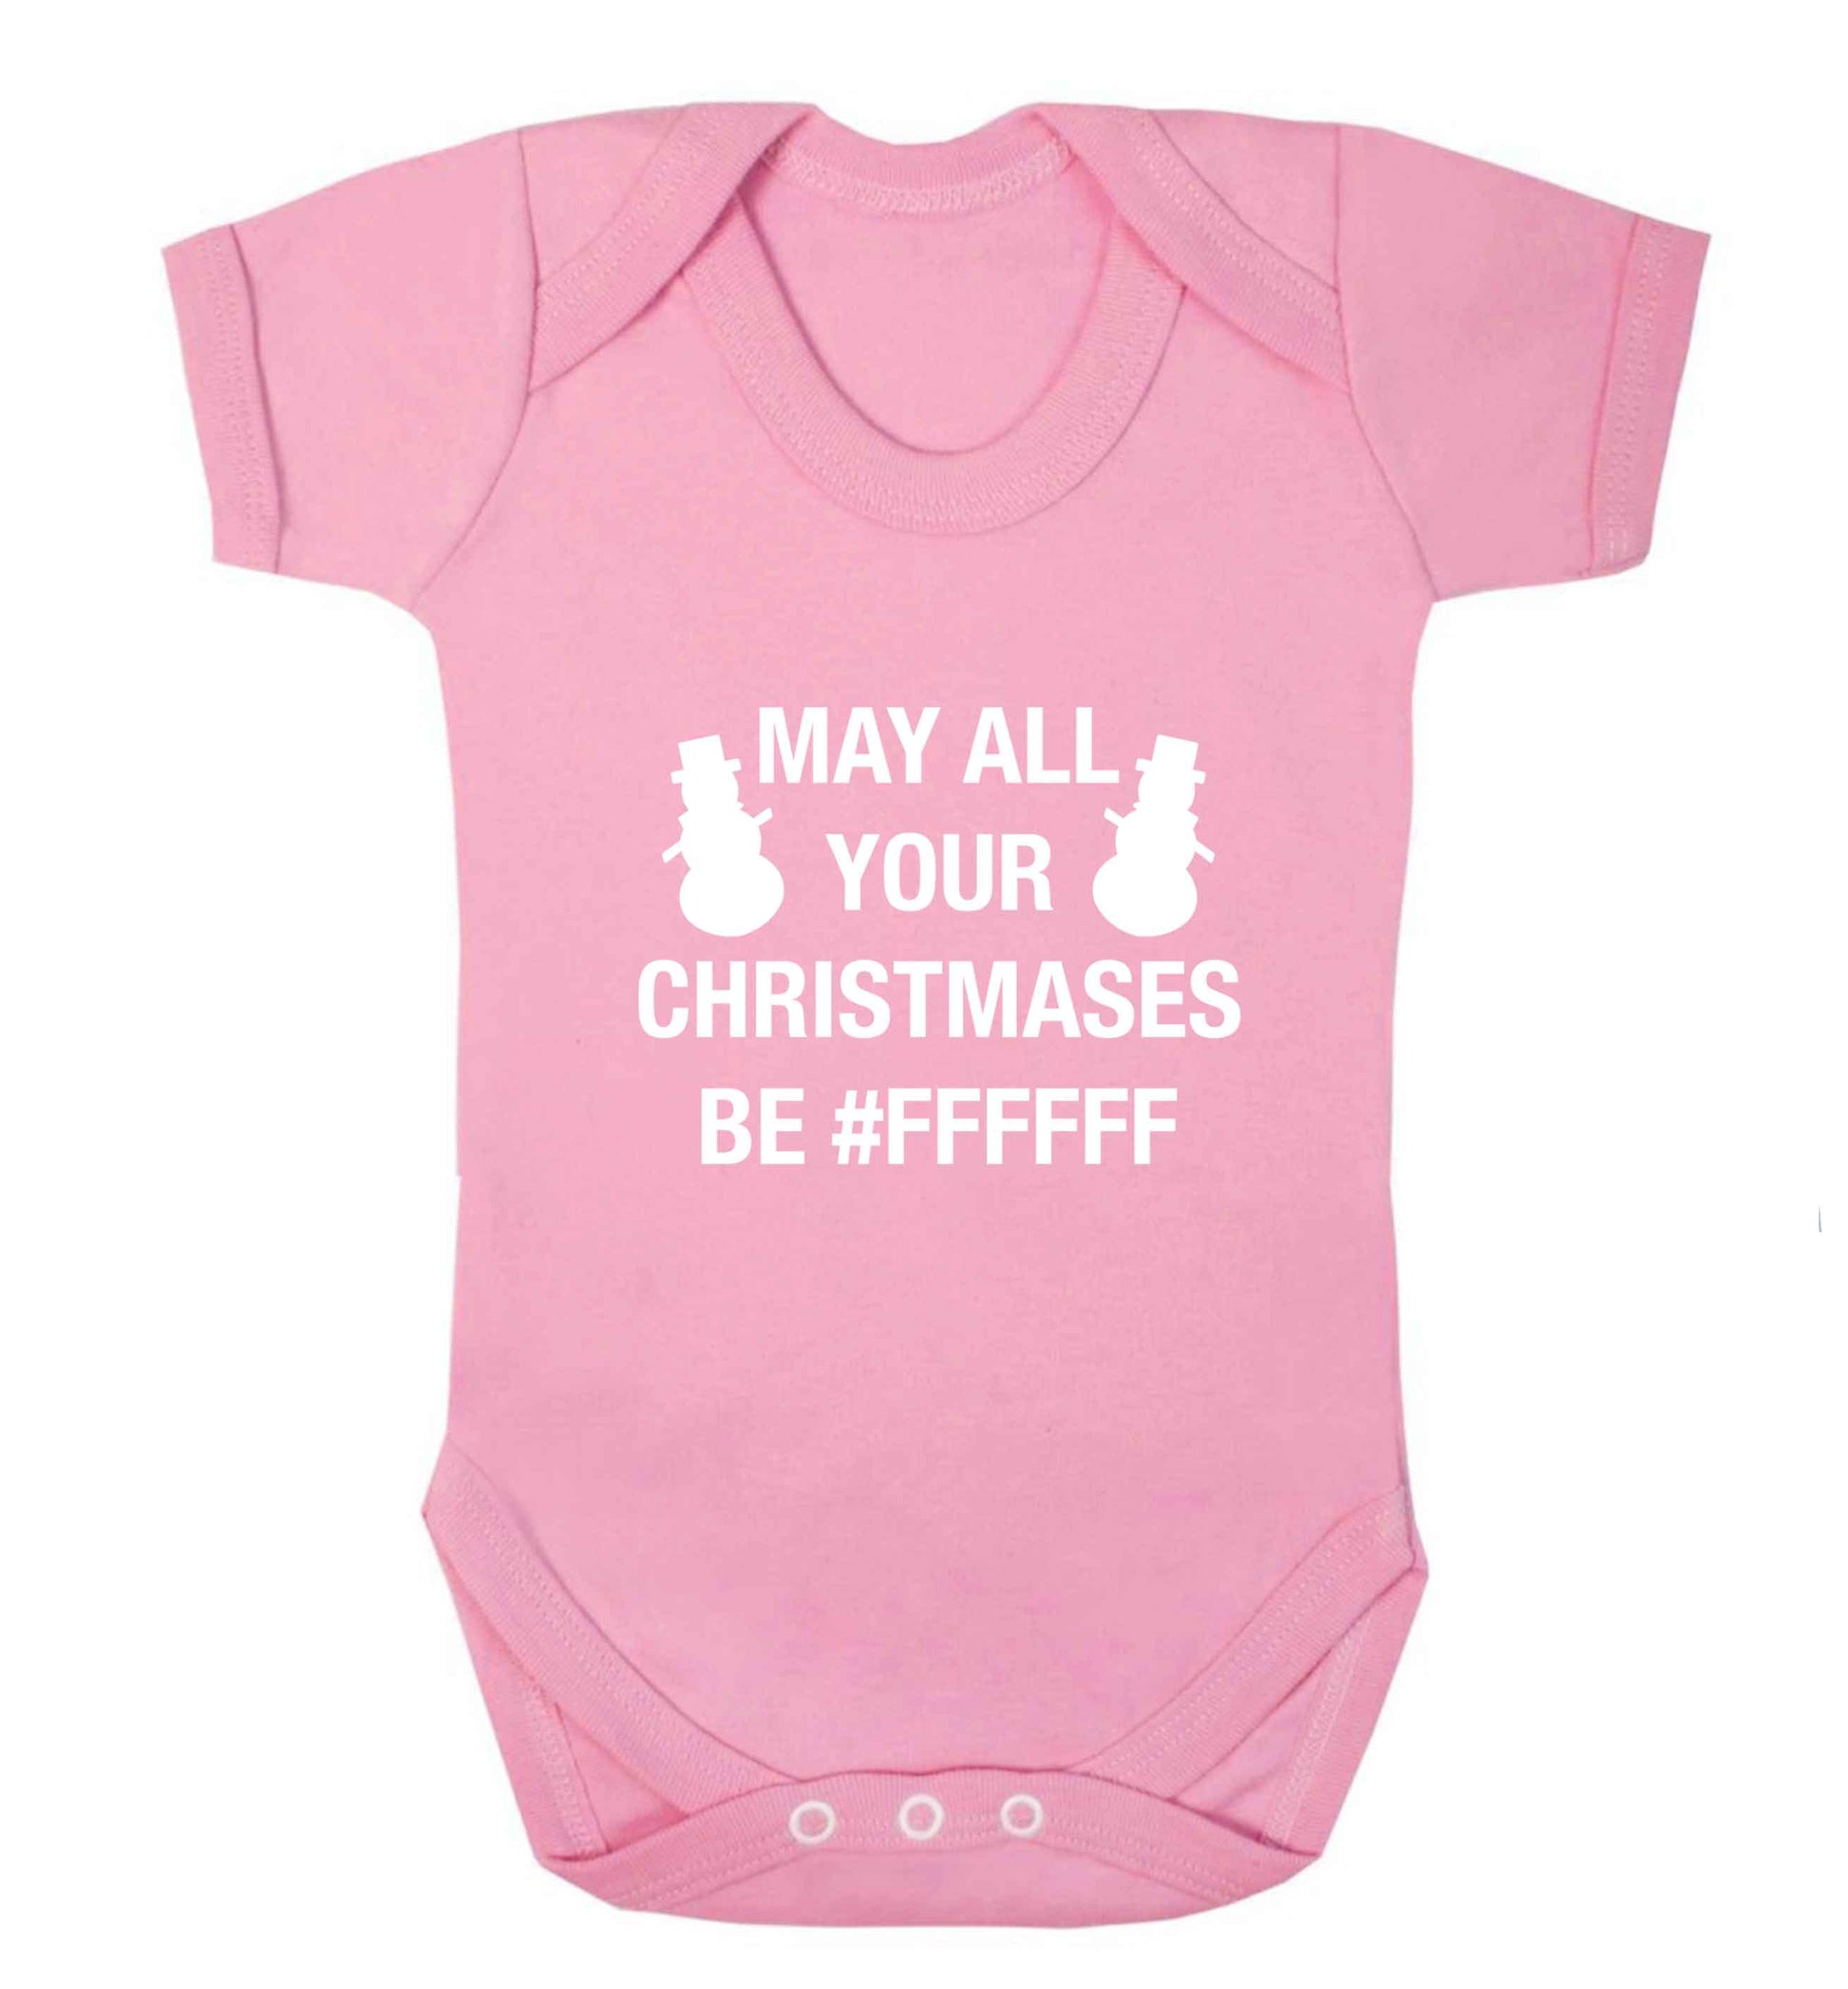 May all your Christmases be #FFFFFF baby vest pale pink 18-24 months